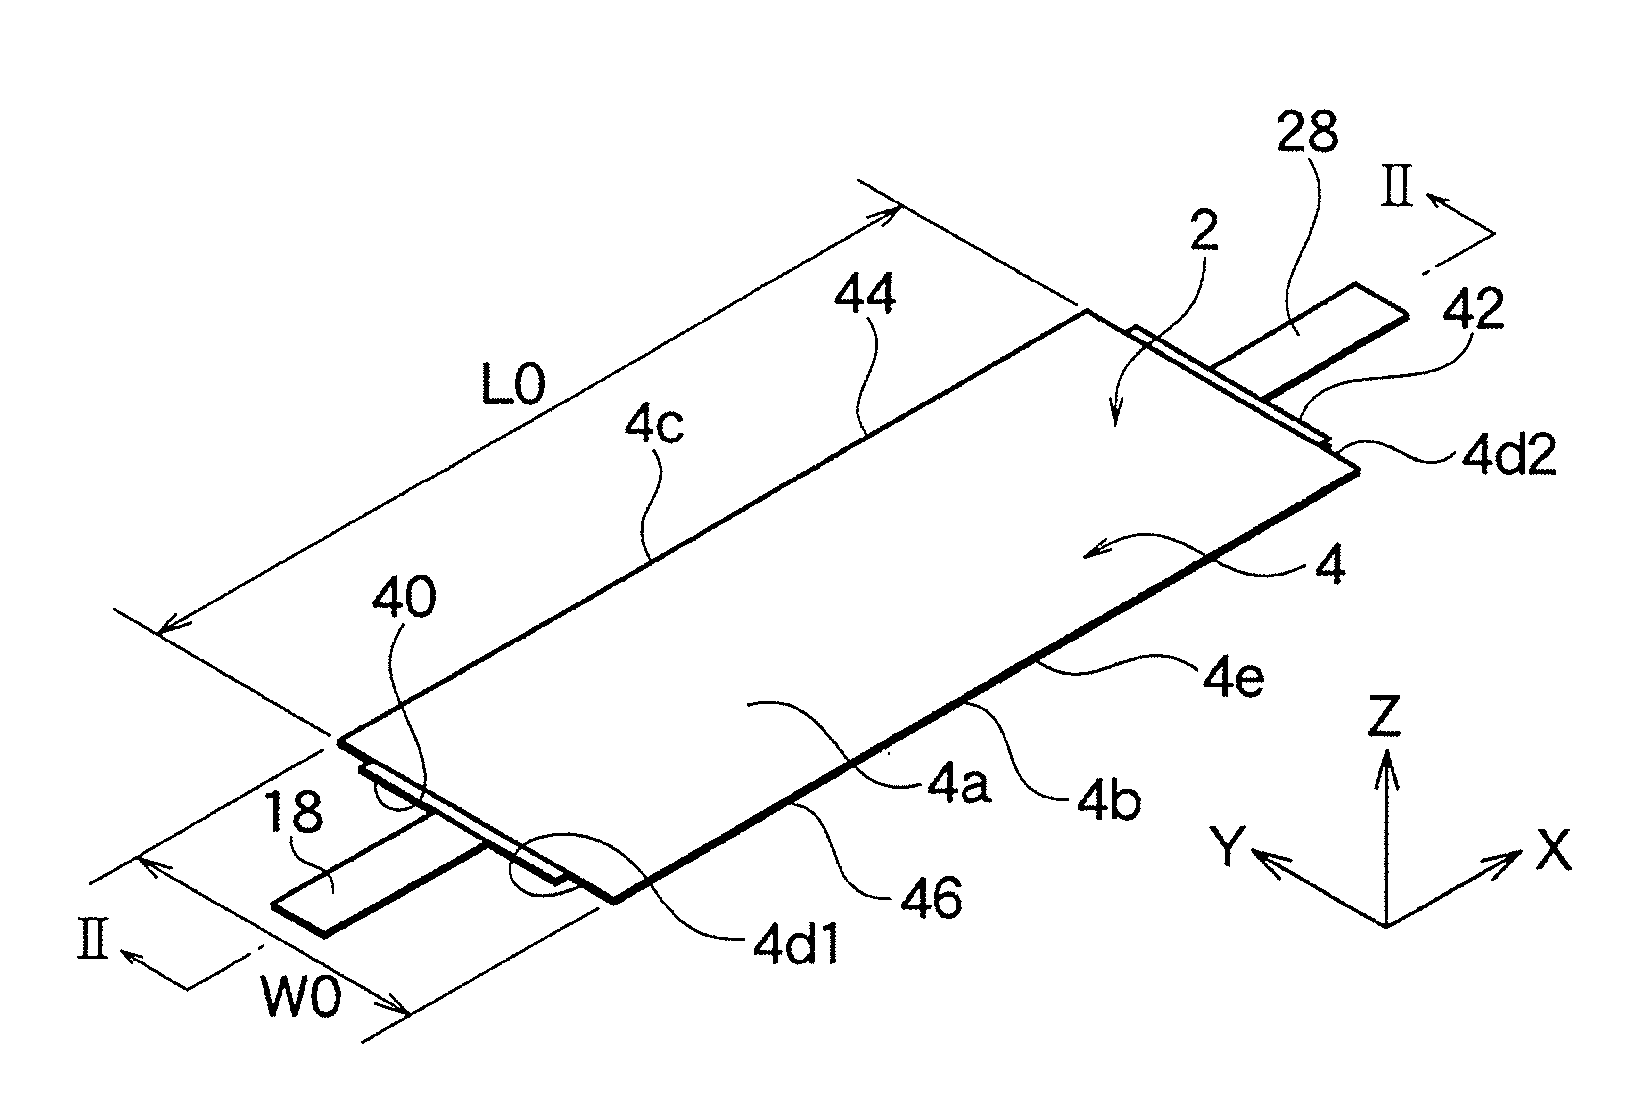 Electrochemical device